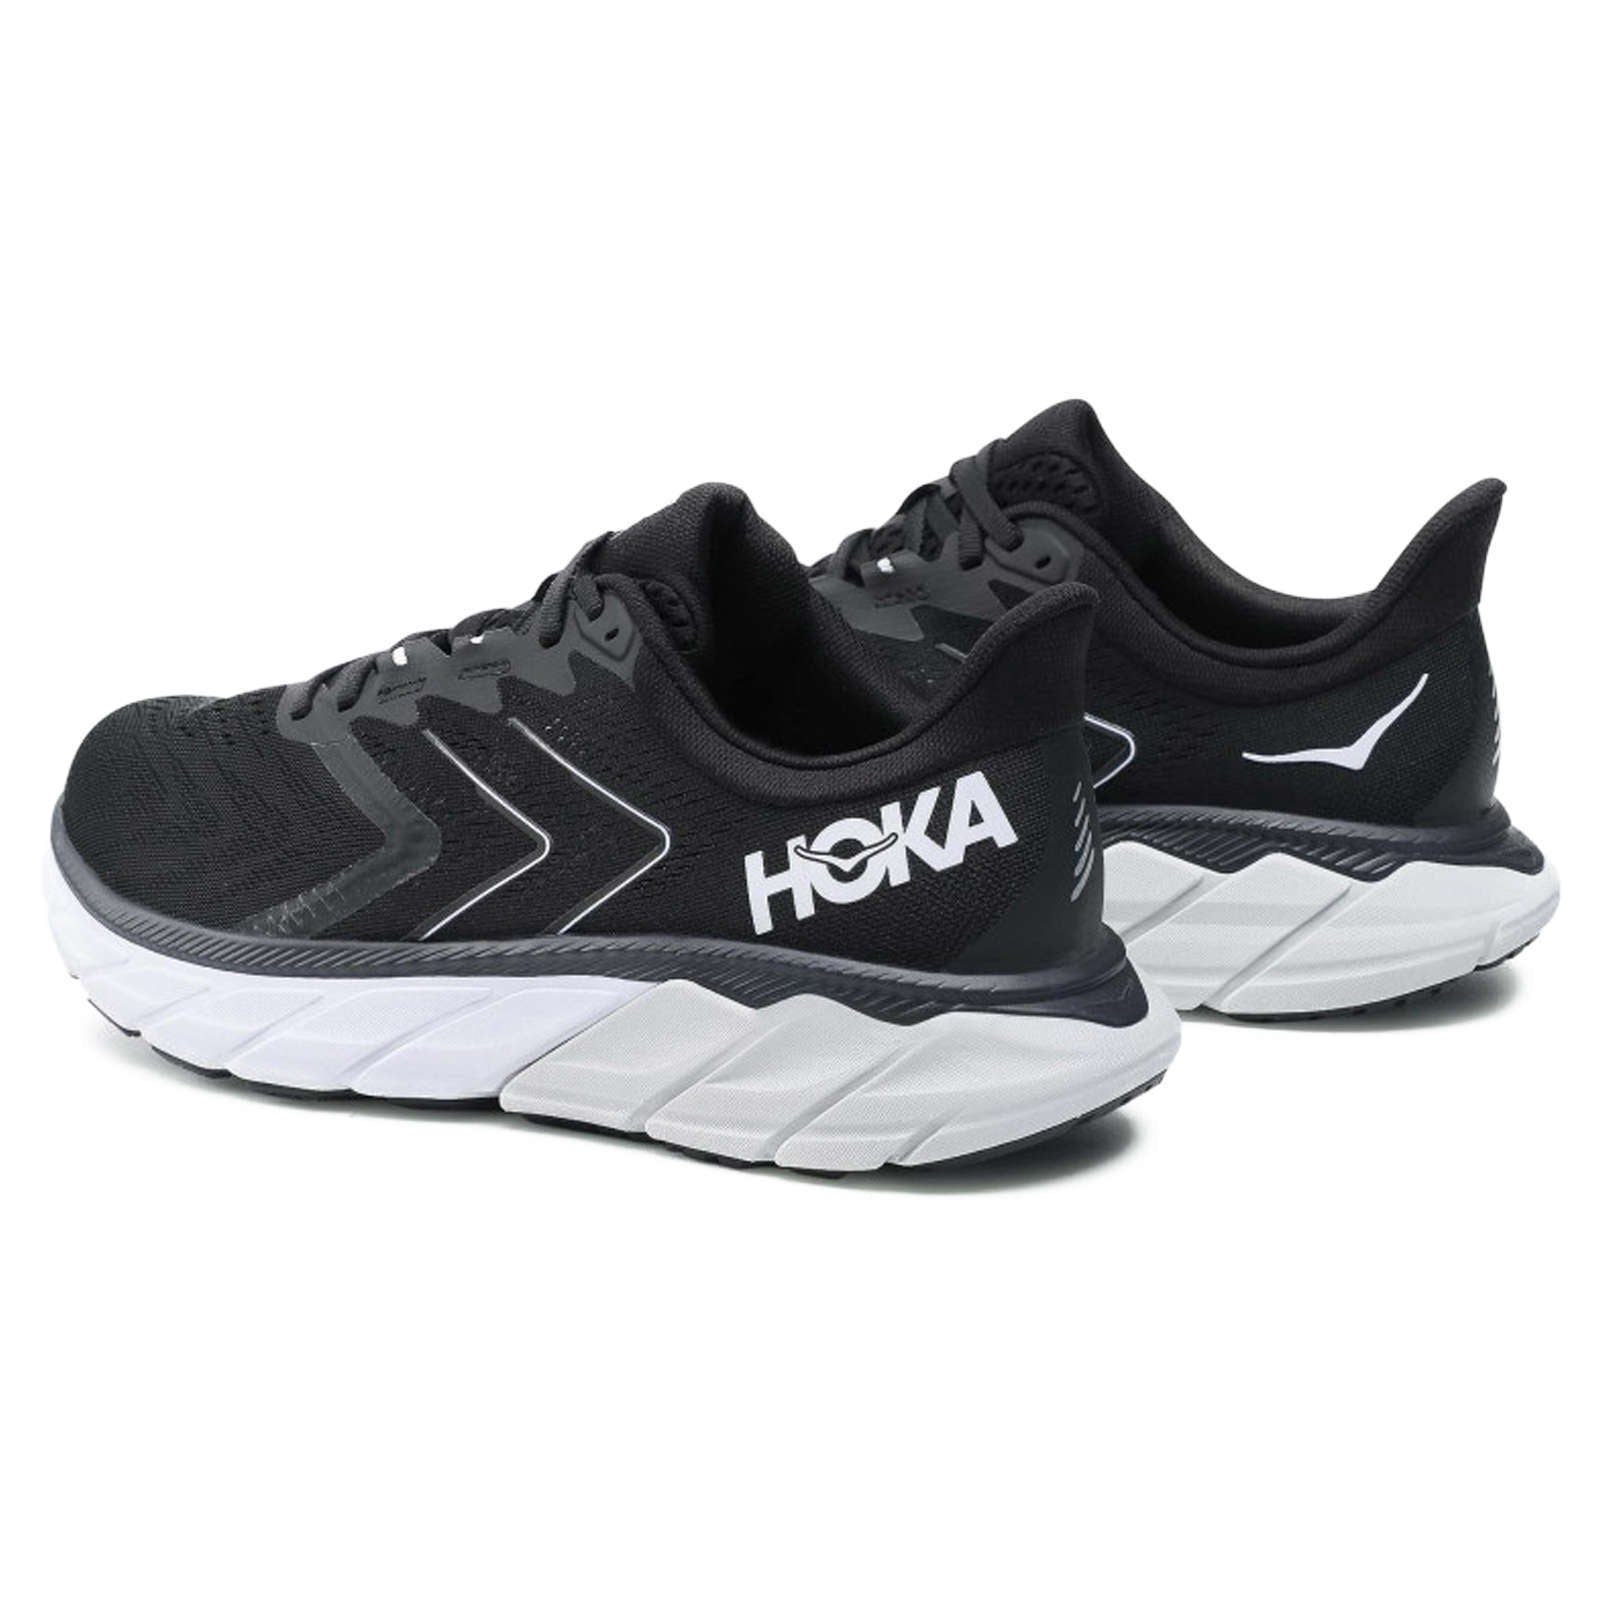 Hoka One One Arahi 5 Synthetic Textile Men's Low-Top Road Running Trainers#color_black white